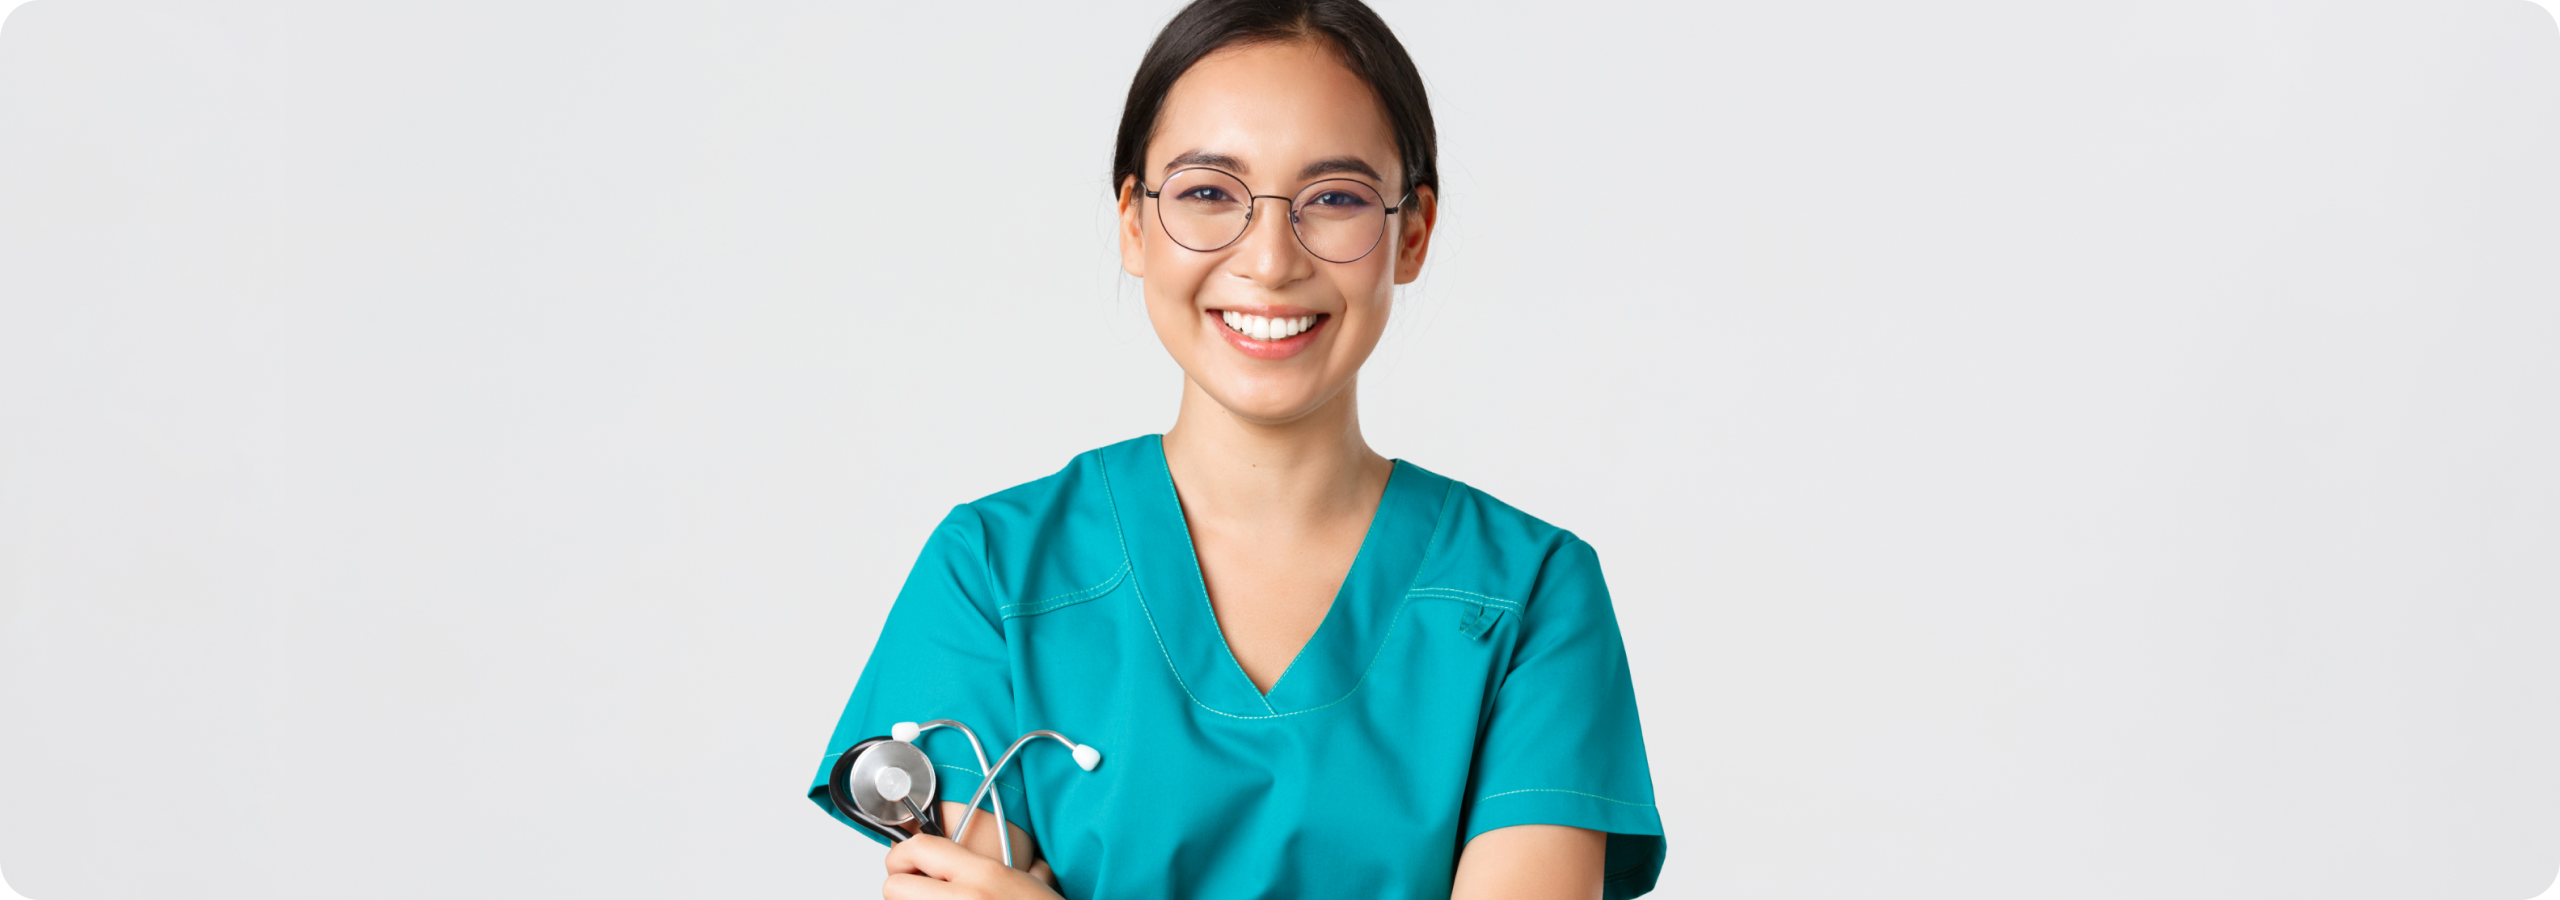 PHP is Proeza’s nurse staffing company, serving hospitals in the U.S.